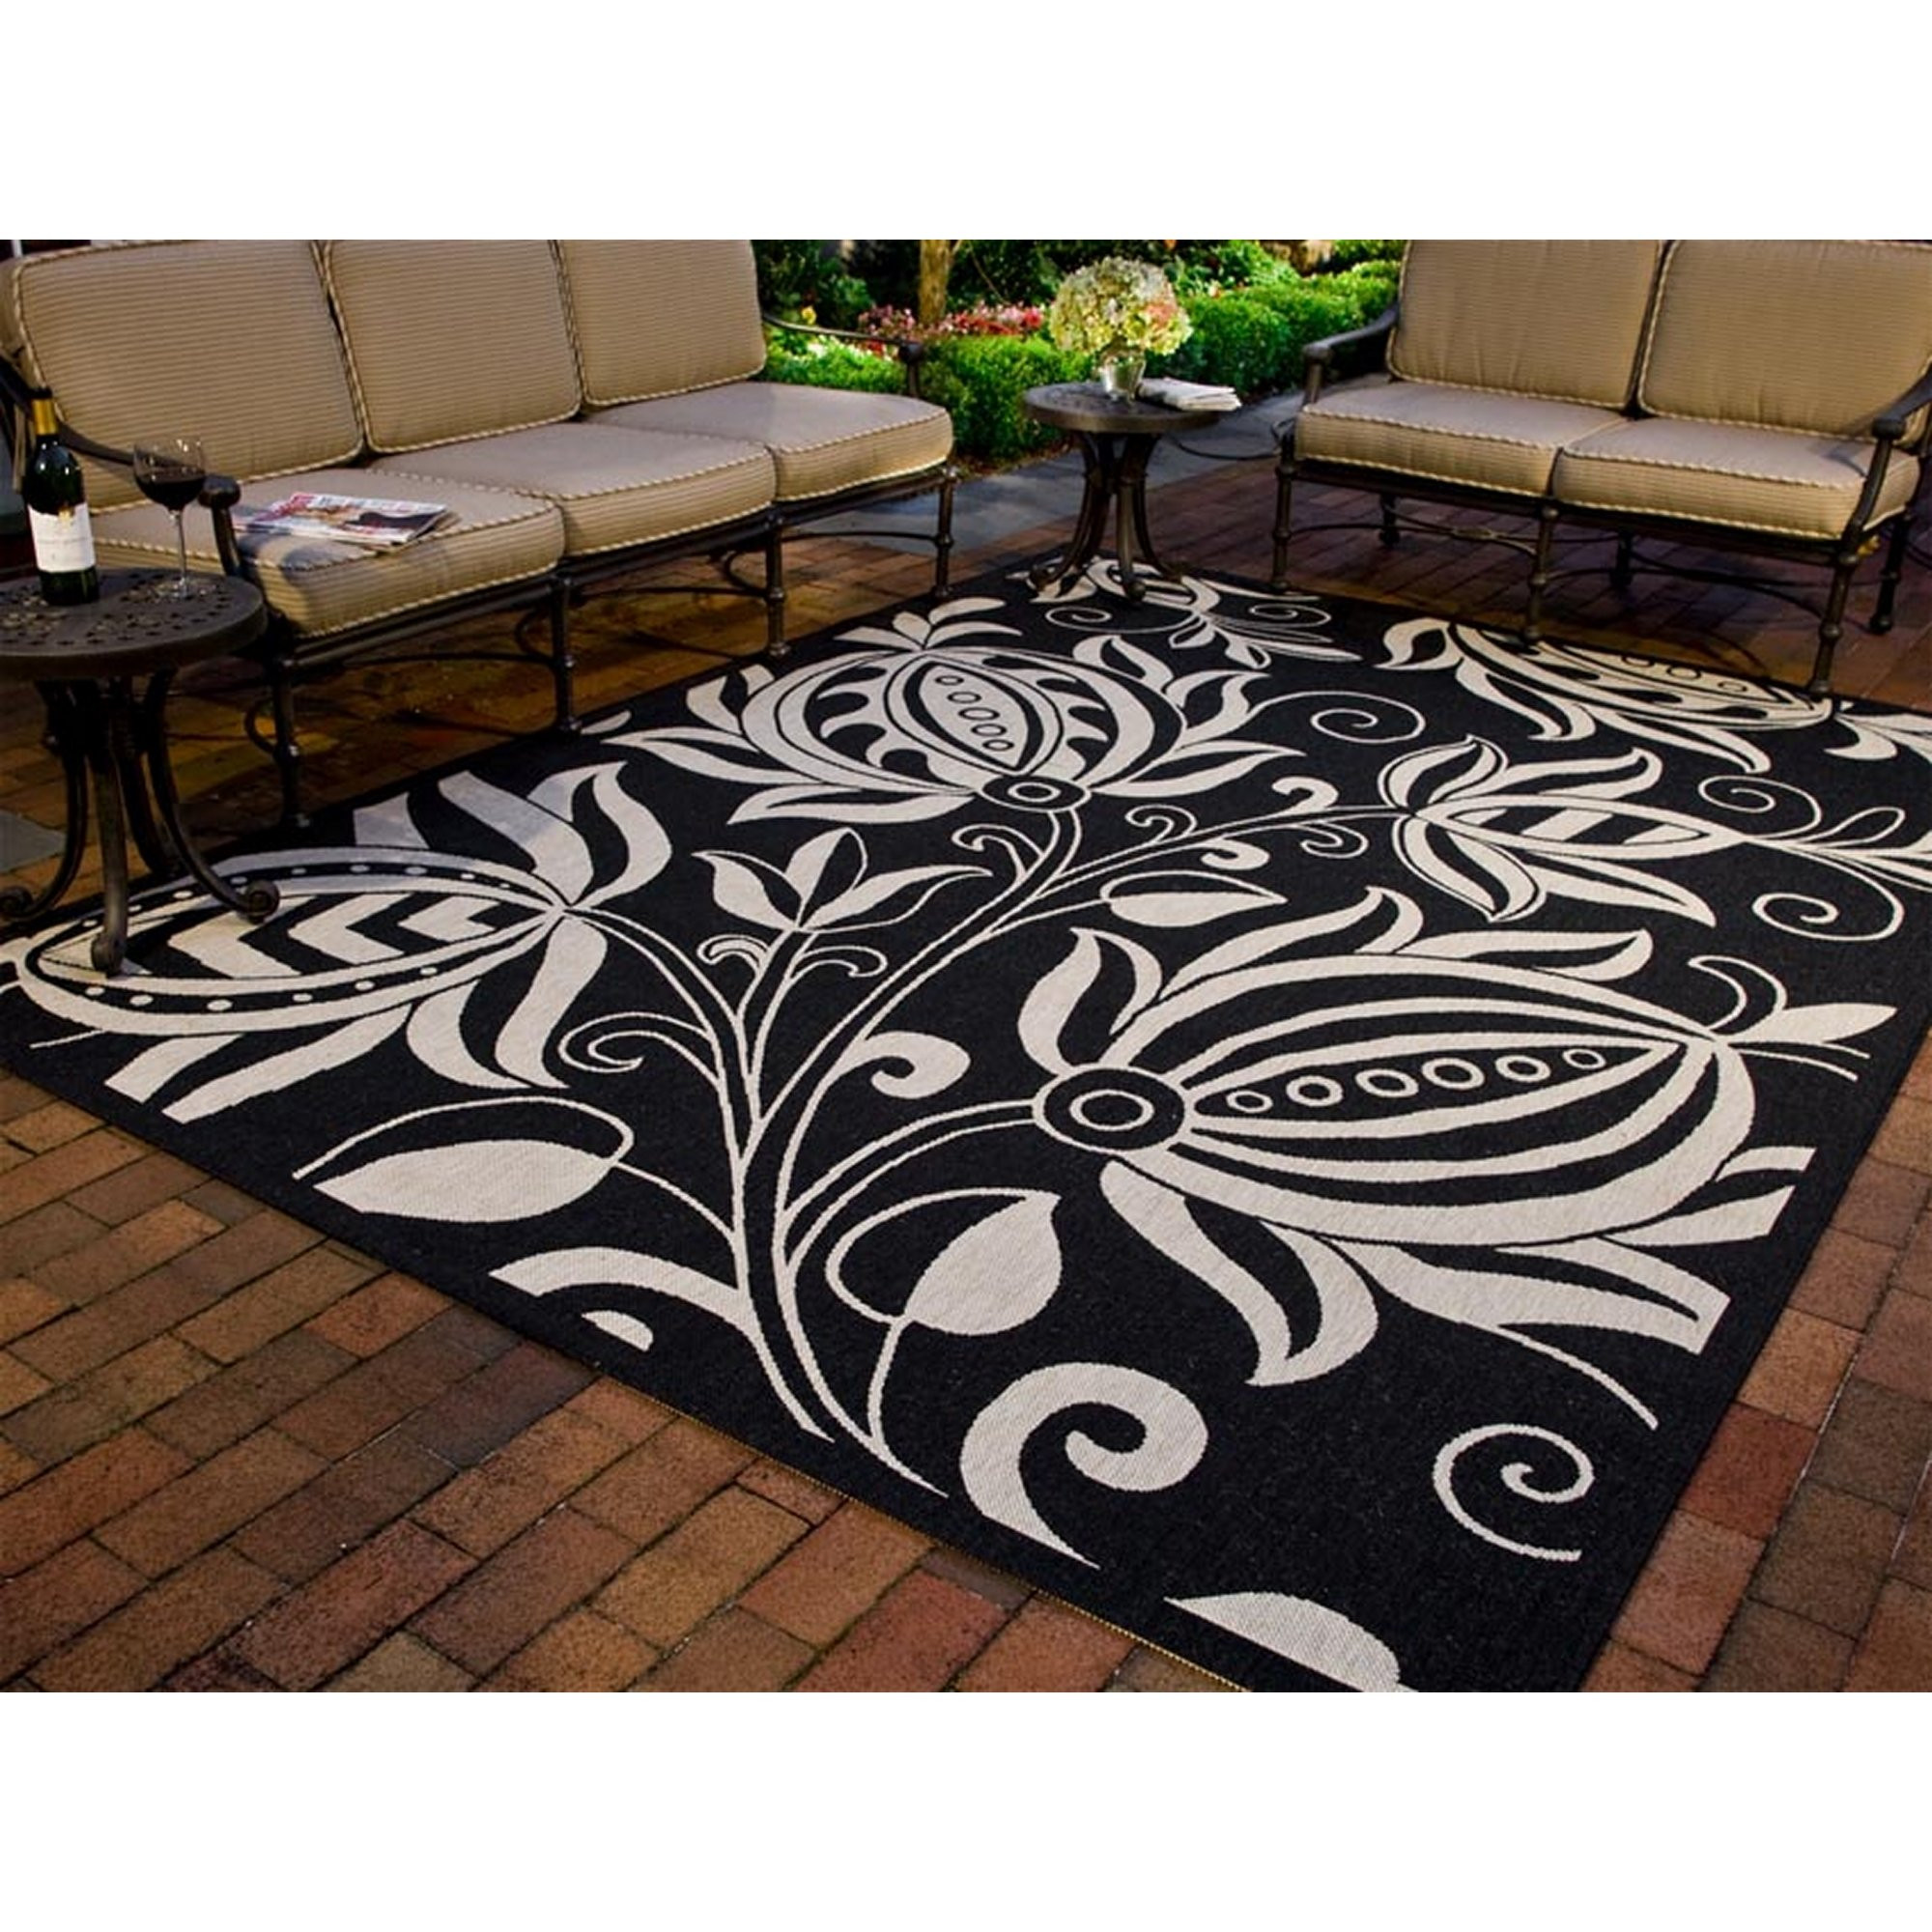 Best ideas about Outdoor Patio Rug
. Save or Pin Safavieh Courtyard Black & Tan Indoor Outdoor Area Rug Now.